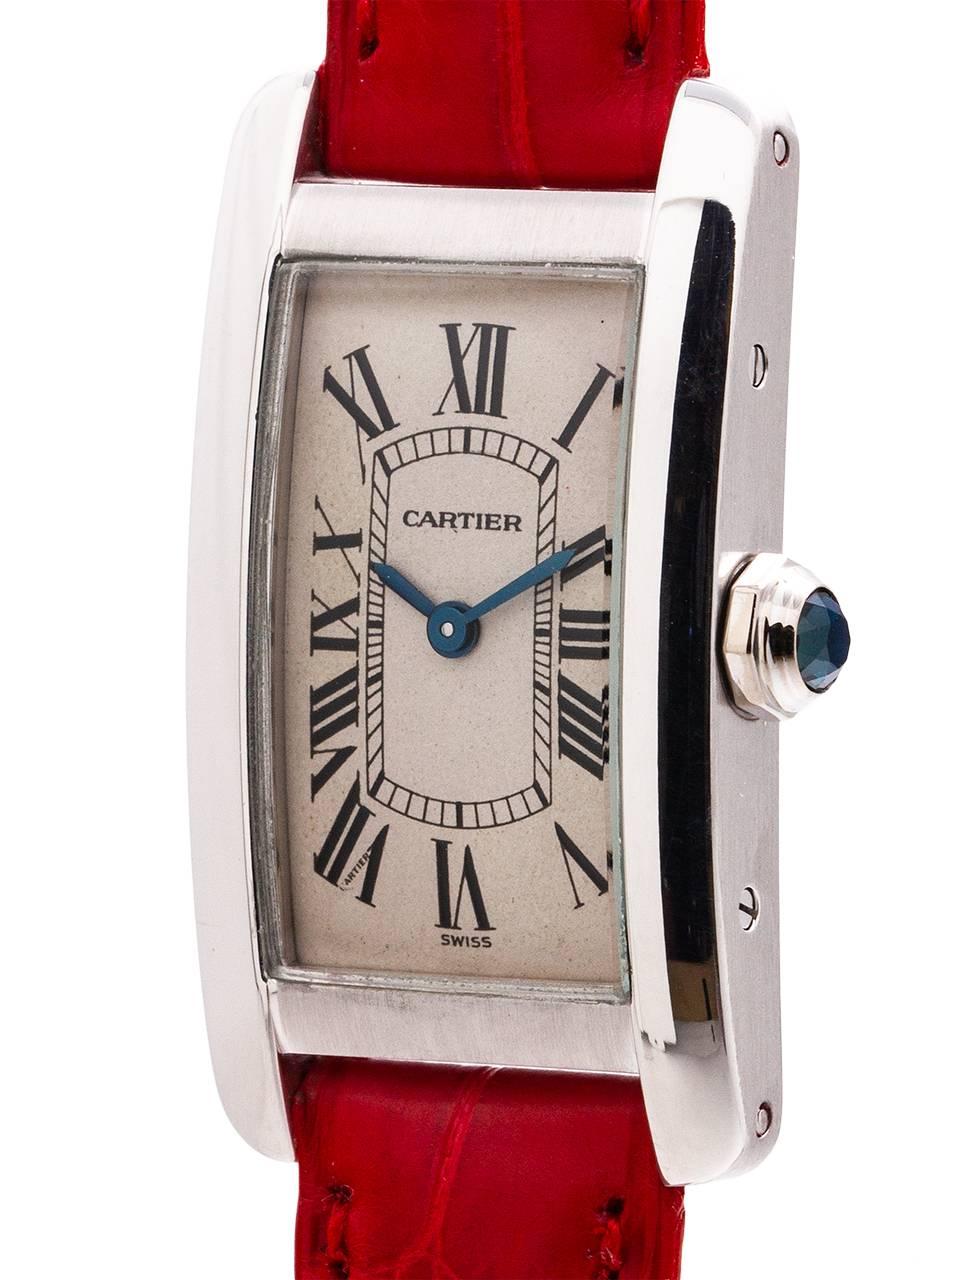 
Classic Cartier lady’s 18K white gold Tank American ref 1713 circa 1990’s. Featuring classic curvex style 20 X 35mm case secured by 4 side screws and 8 caseback screws. With original classic silvered dial with Roman figures with Cartier “secret”